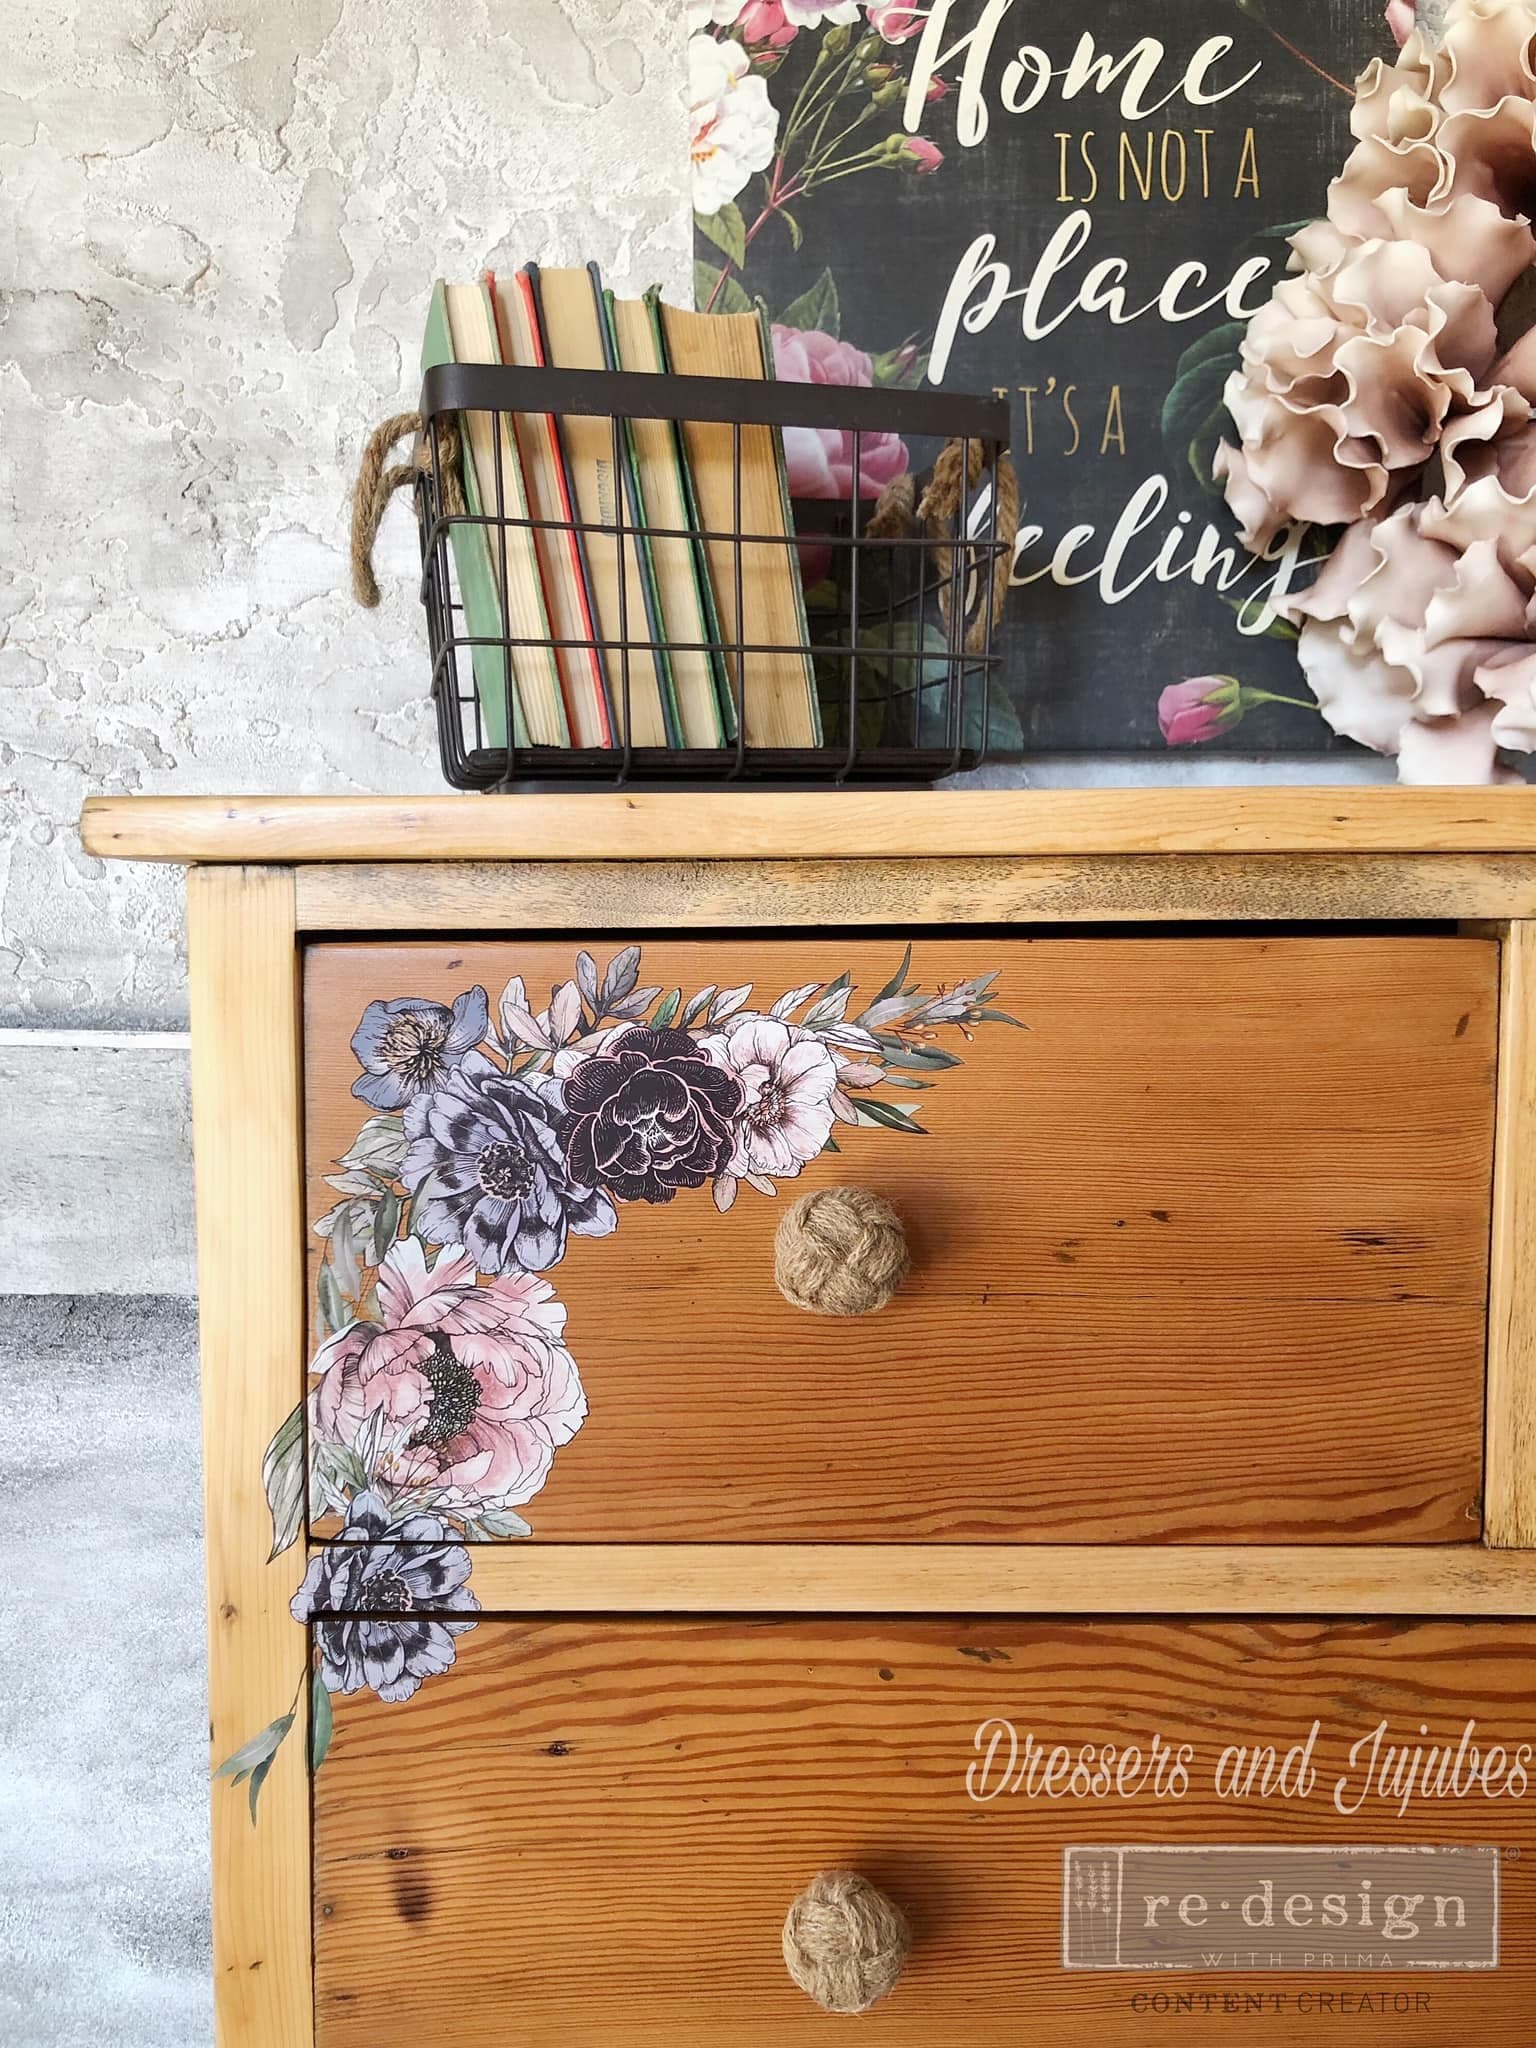 In the meadows - Redesign Décor Transfers® Vintage Paint